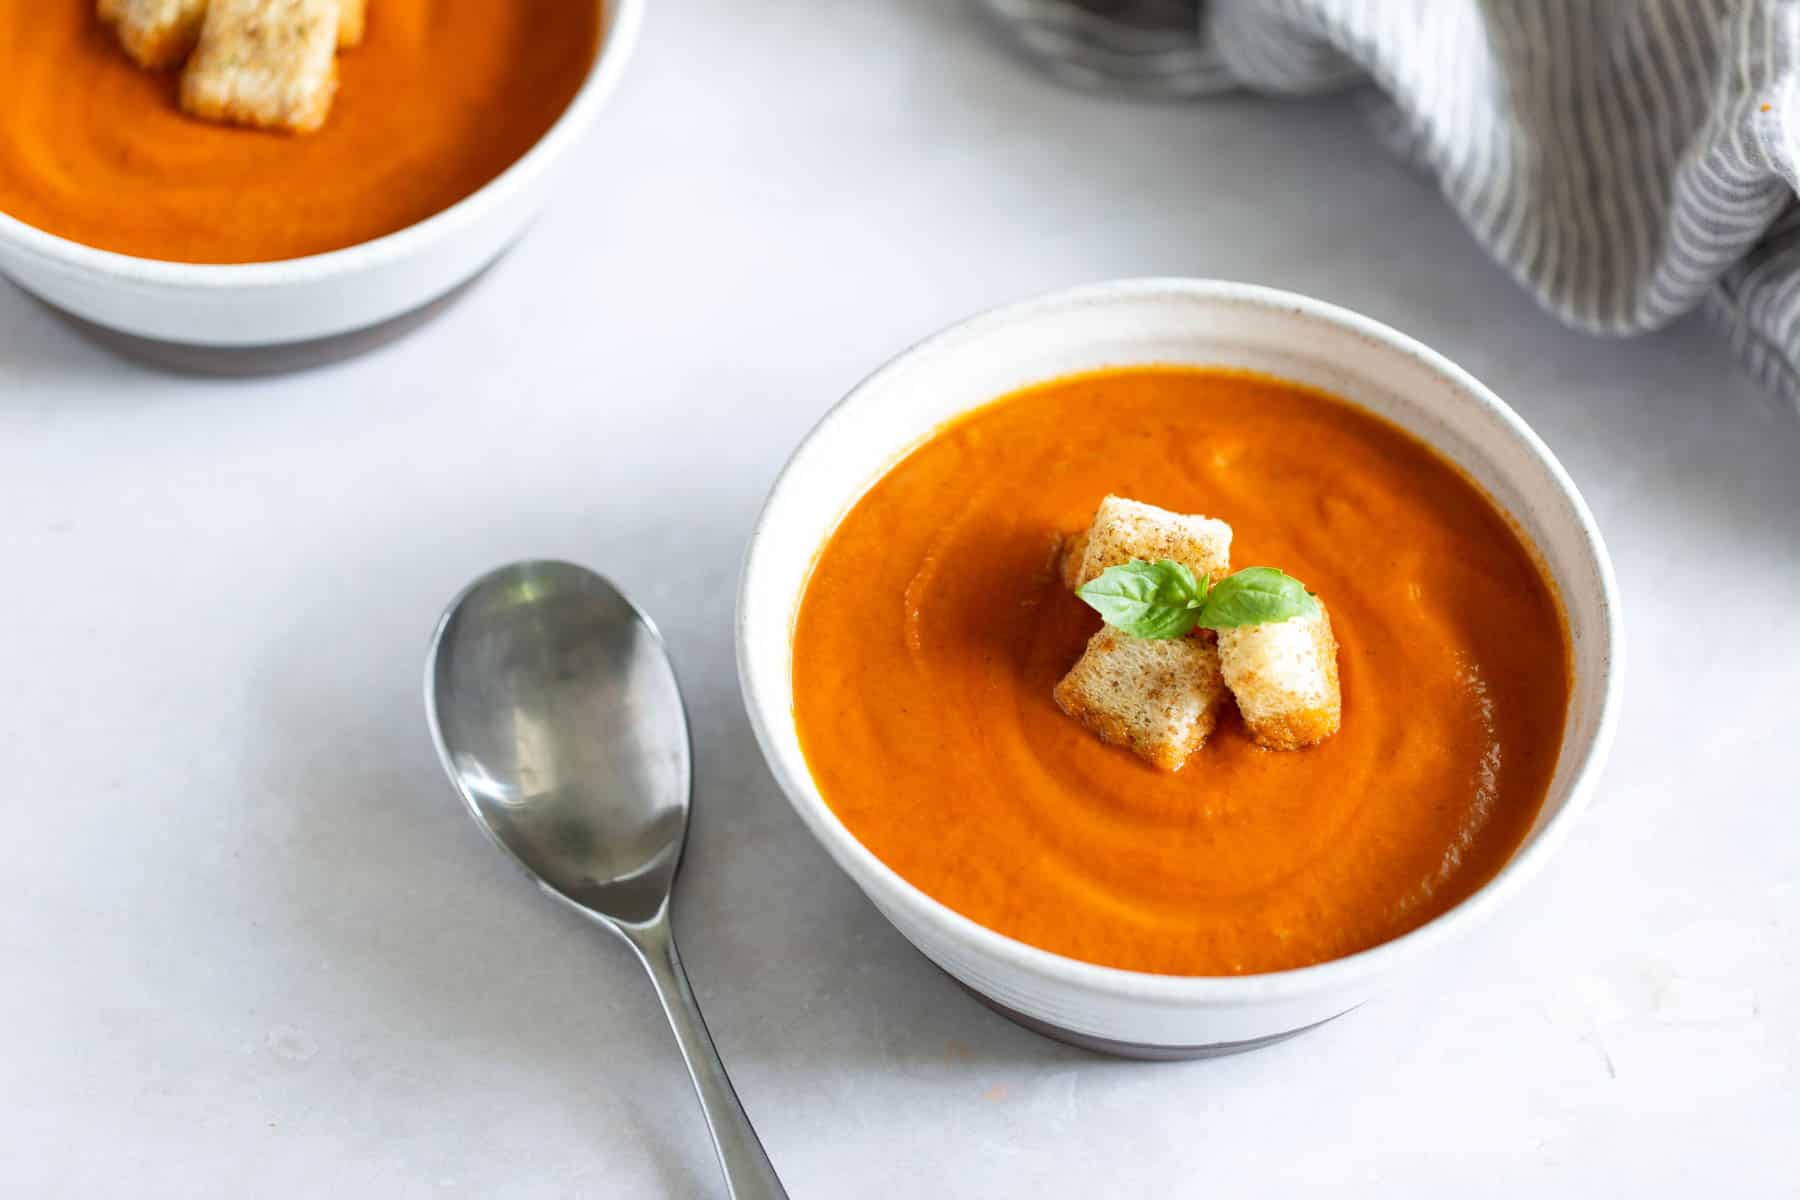 A bowl of creamy tomato soup garnished with croutons and a basil leaf, with a metal spoon placed nearby on a light surface. Another bowl of soup is partially visible in the background.